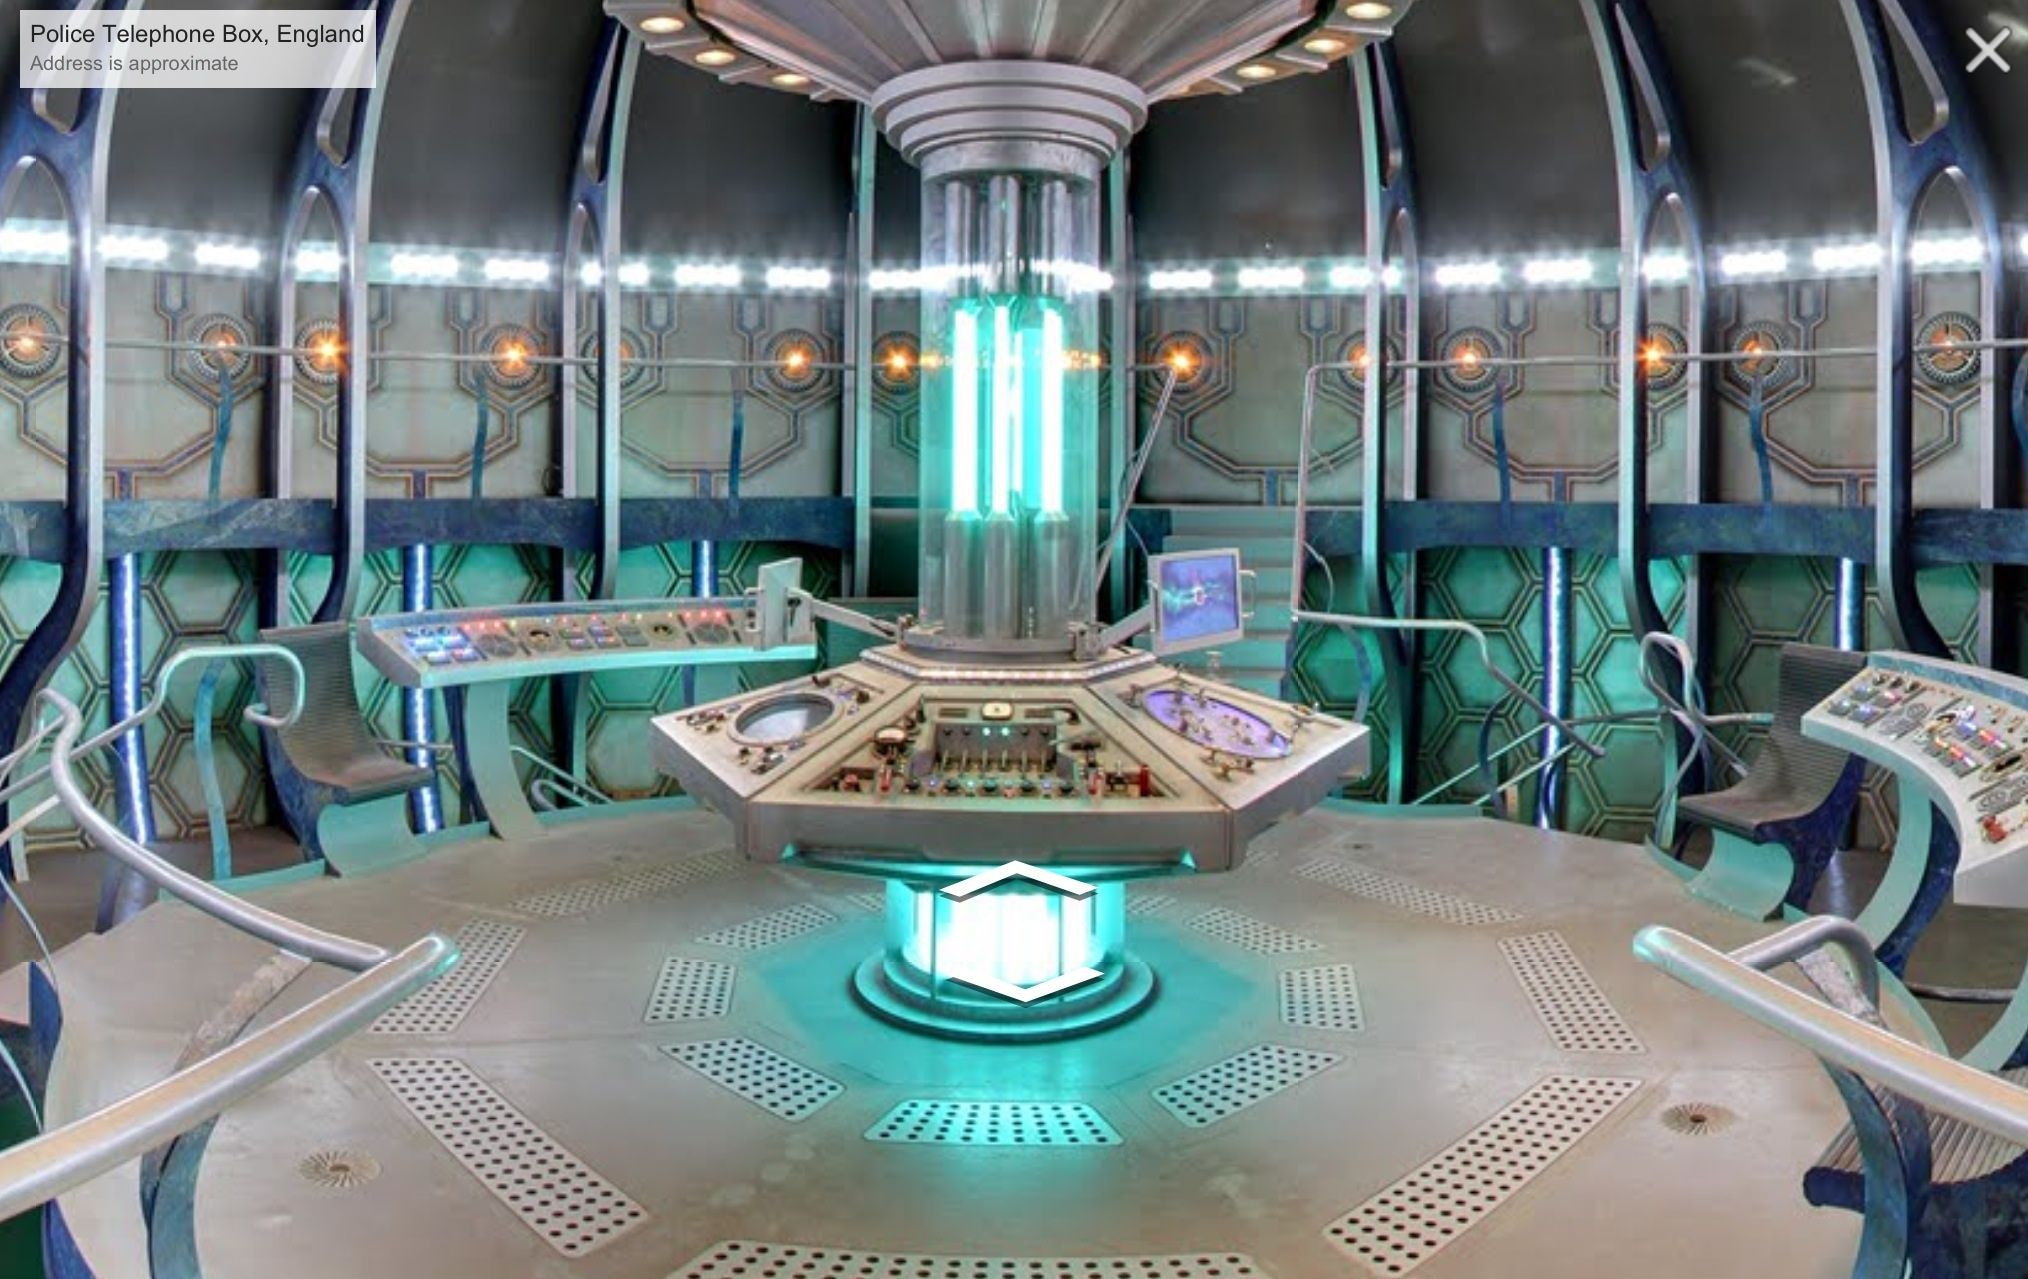 Doctor Who Tardis Interiors Wallpapers - Wallpaper Cave